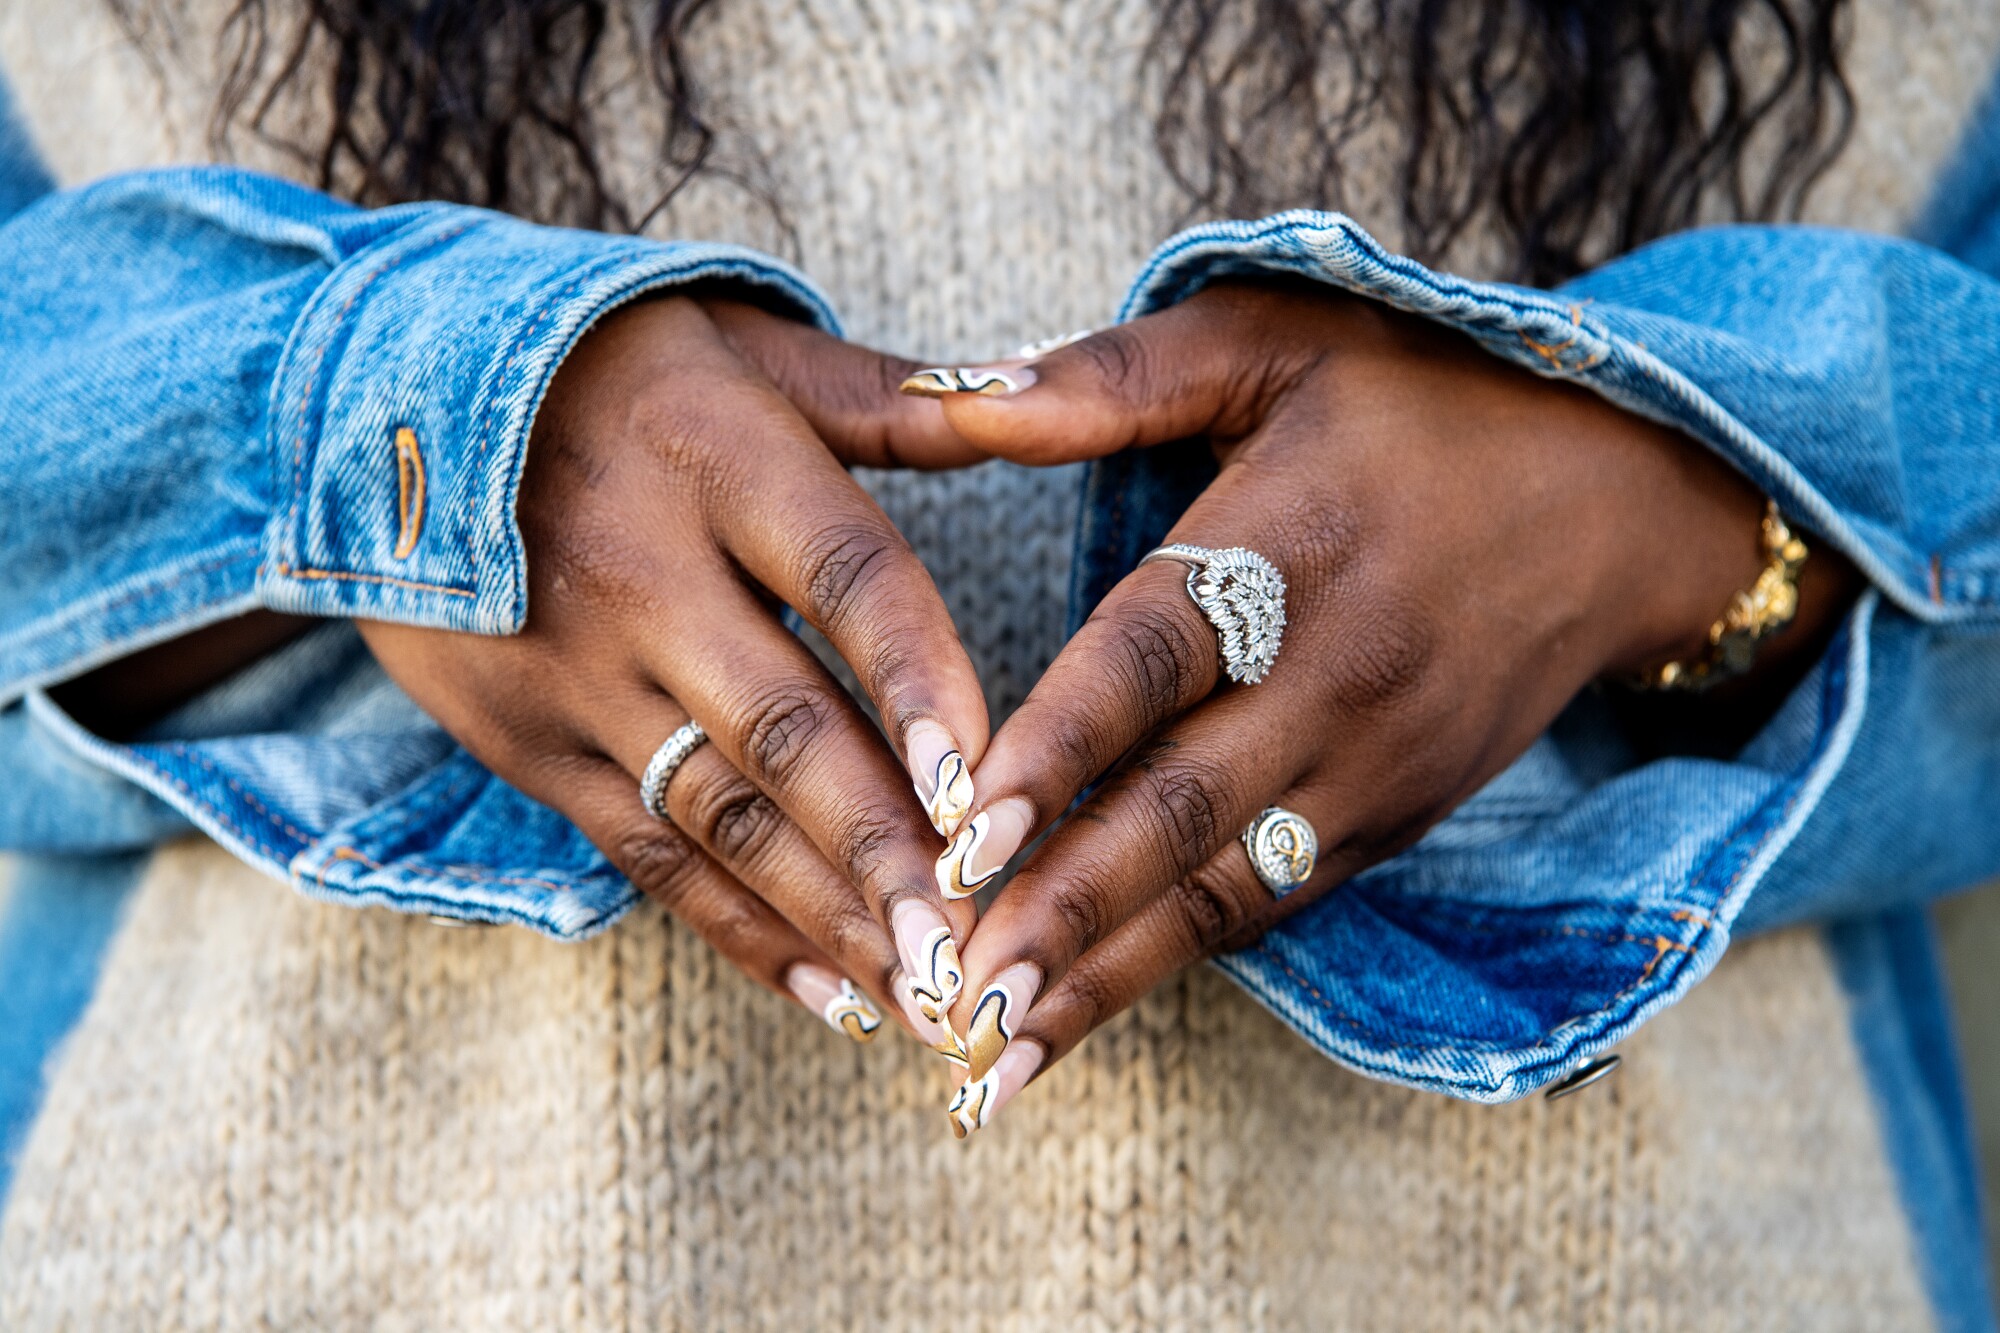 A woman's hands, fingertips together, decorated with several rings and peeking out of denim sleeves.